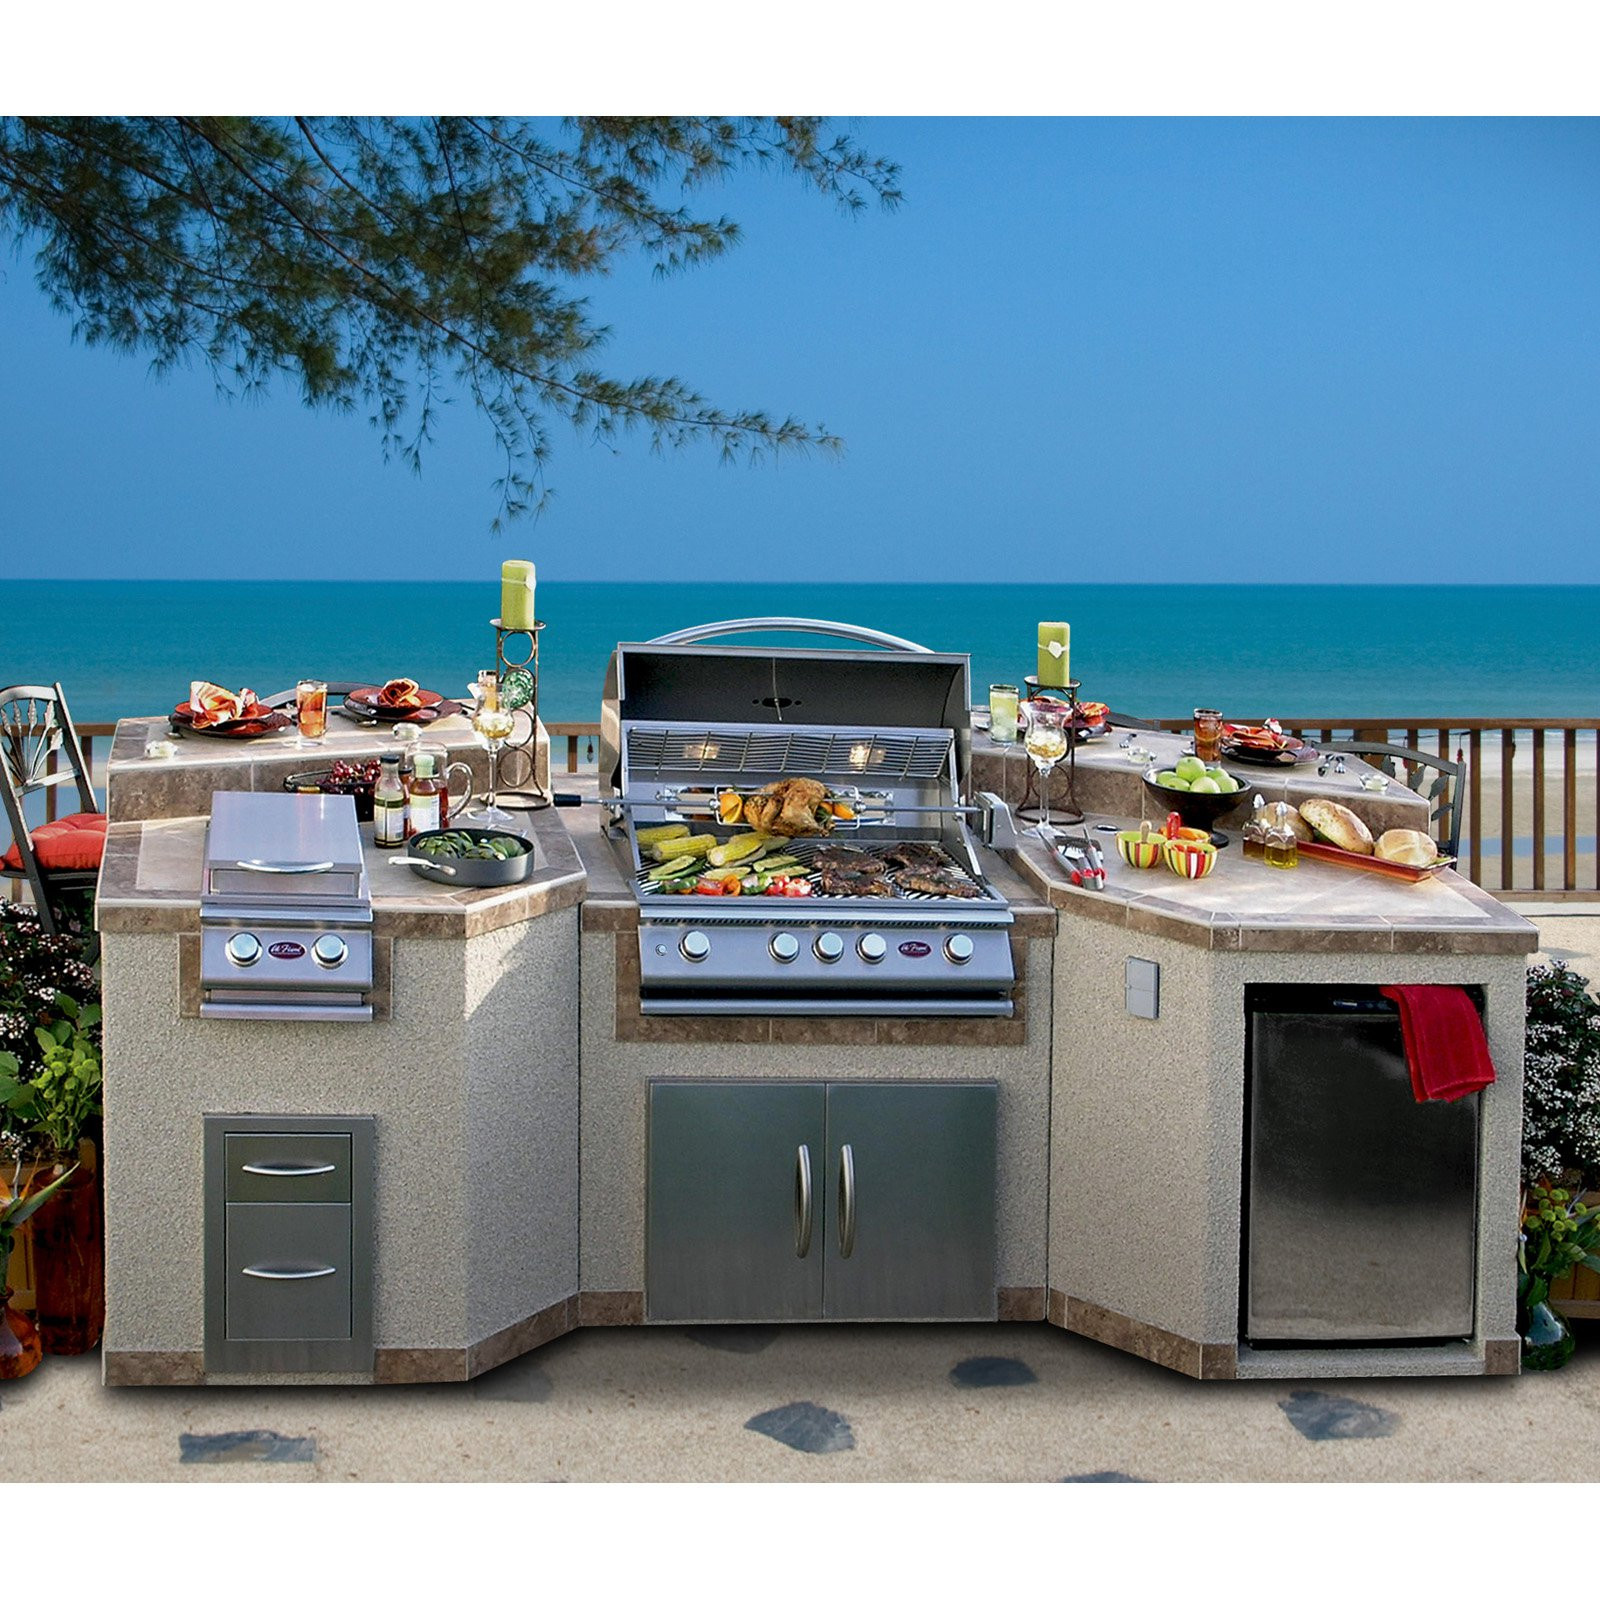 Gas Grill For Outdoor Kitchen
 Cal Flame 3 Piece Island with 4 Burner Natural Gas BBQ